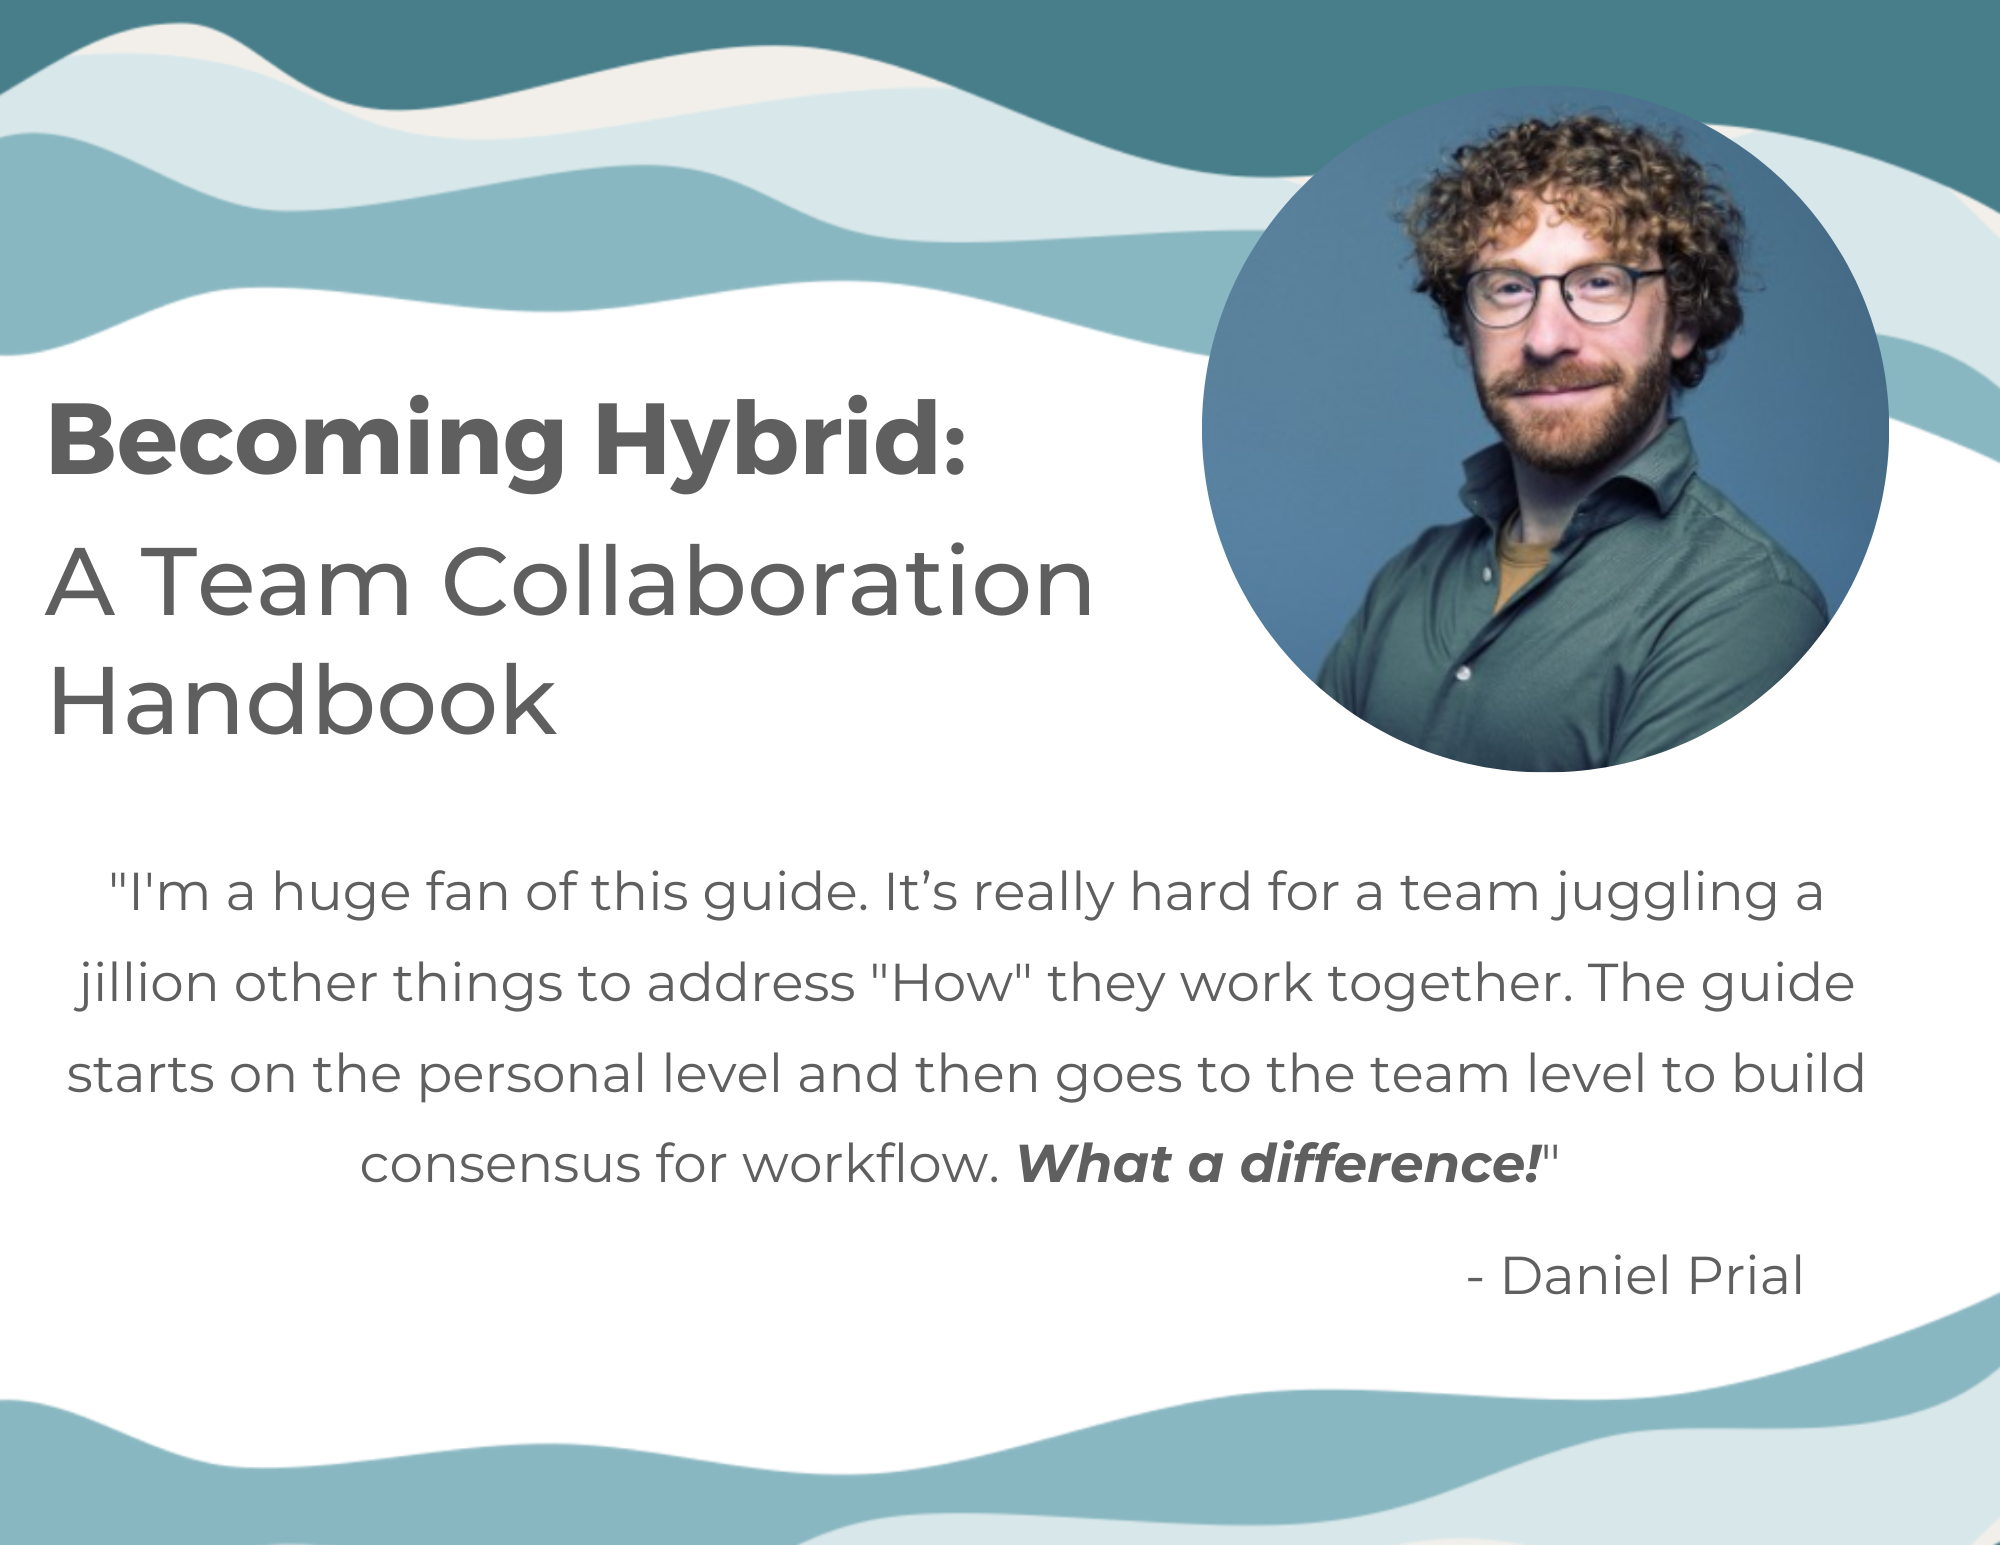 "I'm a huge fan of the Becoming Hybrid Handbook. It’s really hard for a team juggling a jillion other things to address "How" they work together. The guide starts on the personal level and then goes to the team level to build consensus for workflow. What a difference!"